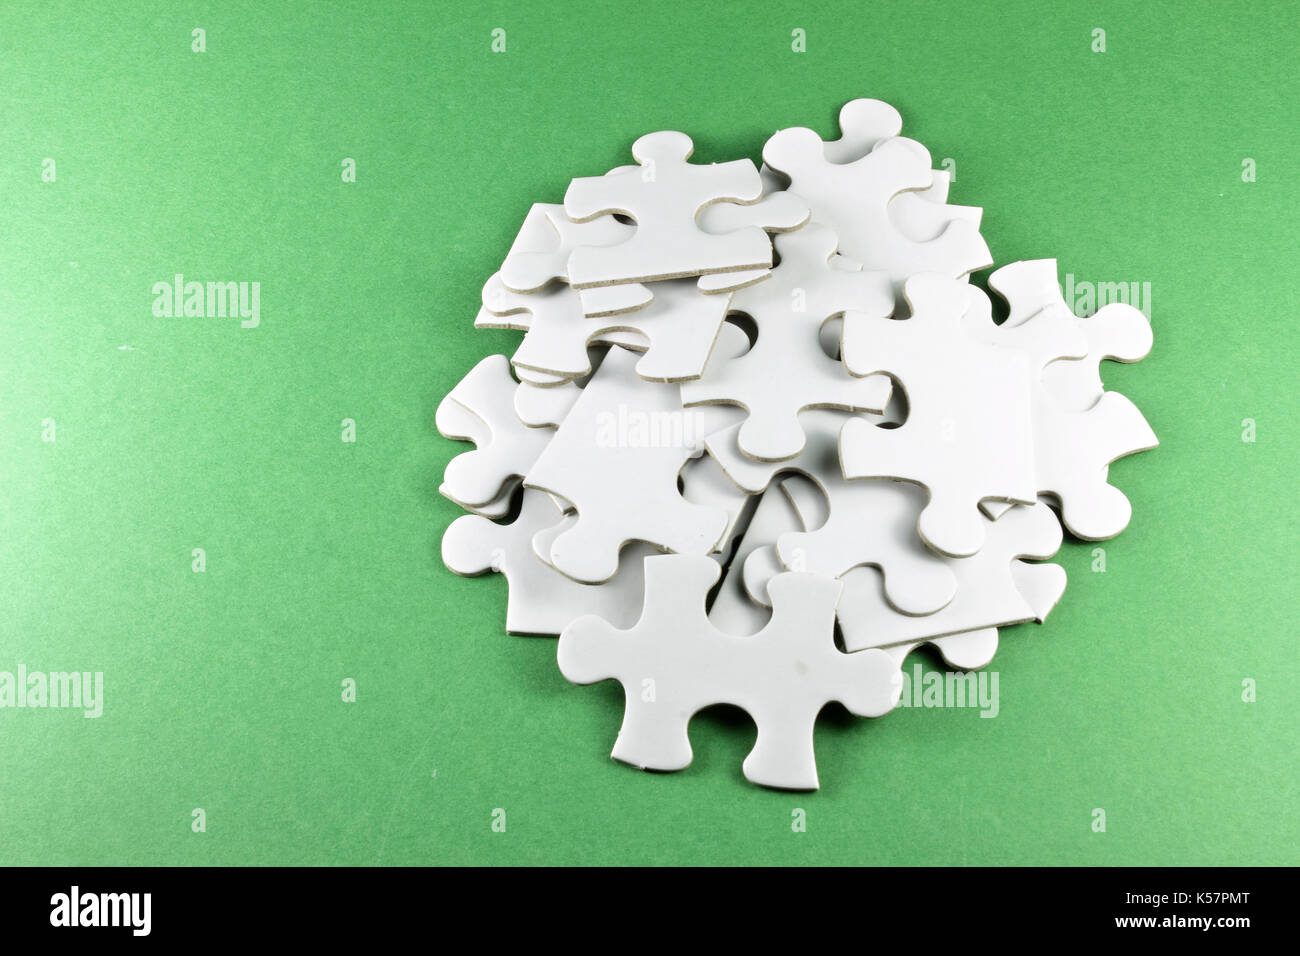 Jigsaw Puzzle Pieces on Green Background Stock Photo